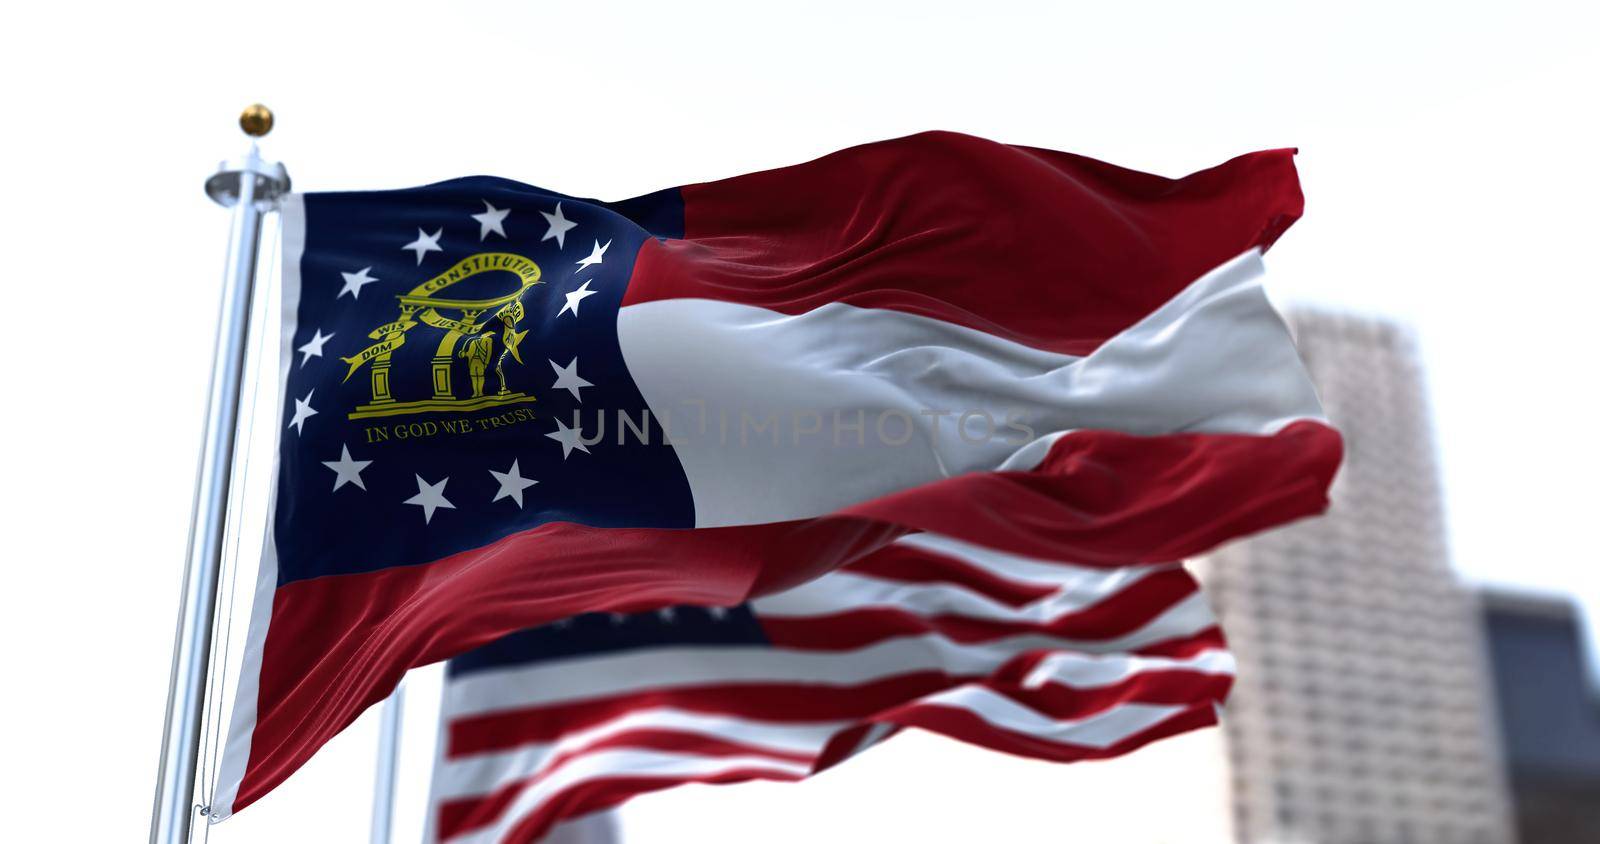 the flag of the US state of Georgia waving in the wind with the American stars and stripes flag blurred in the background by rarrarorro